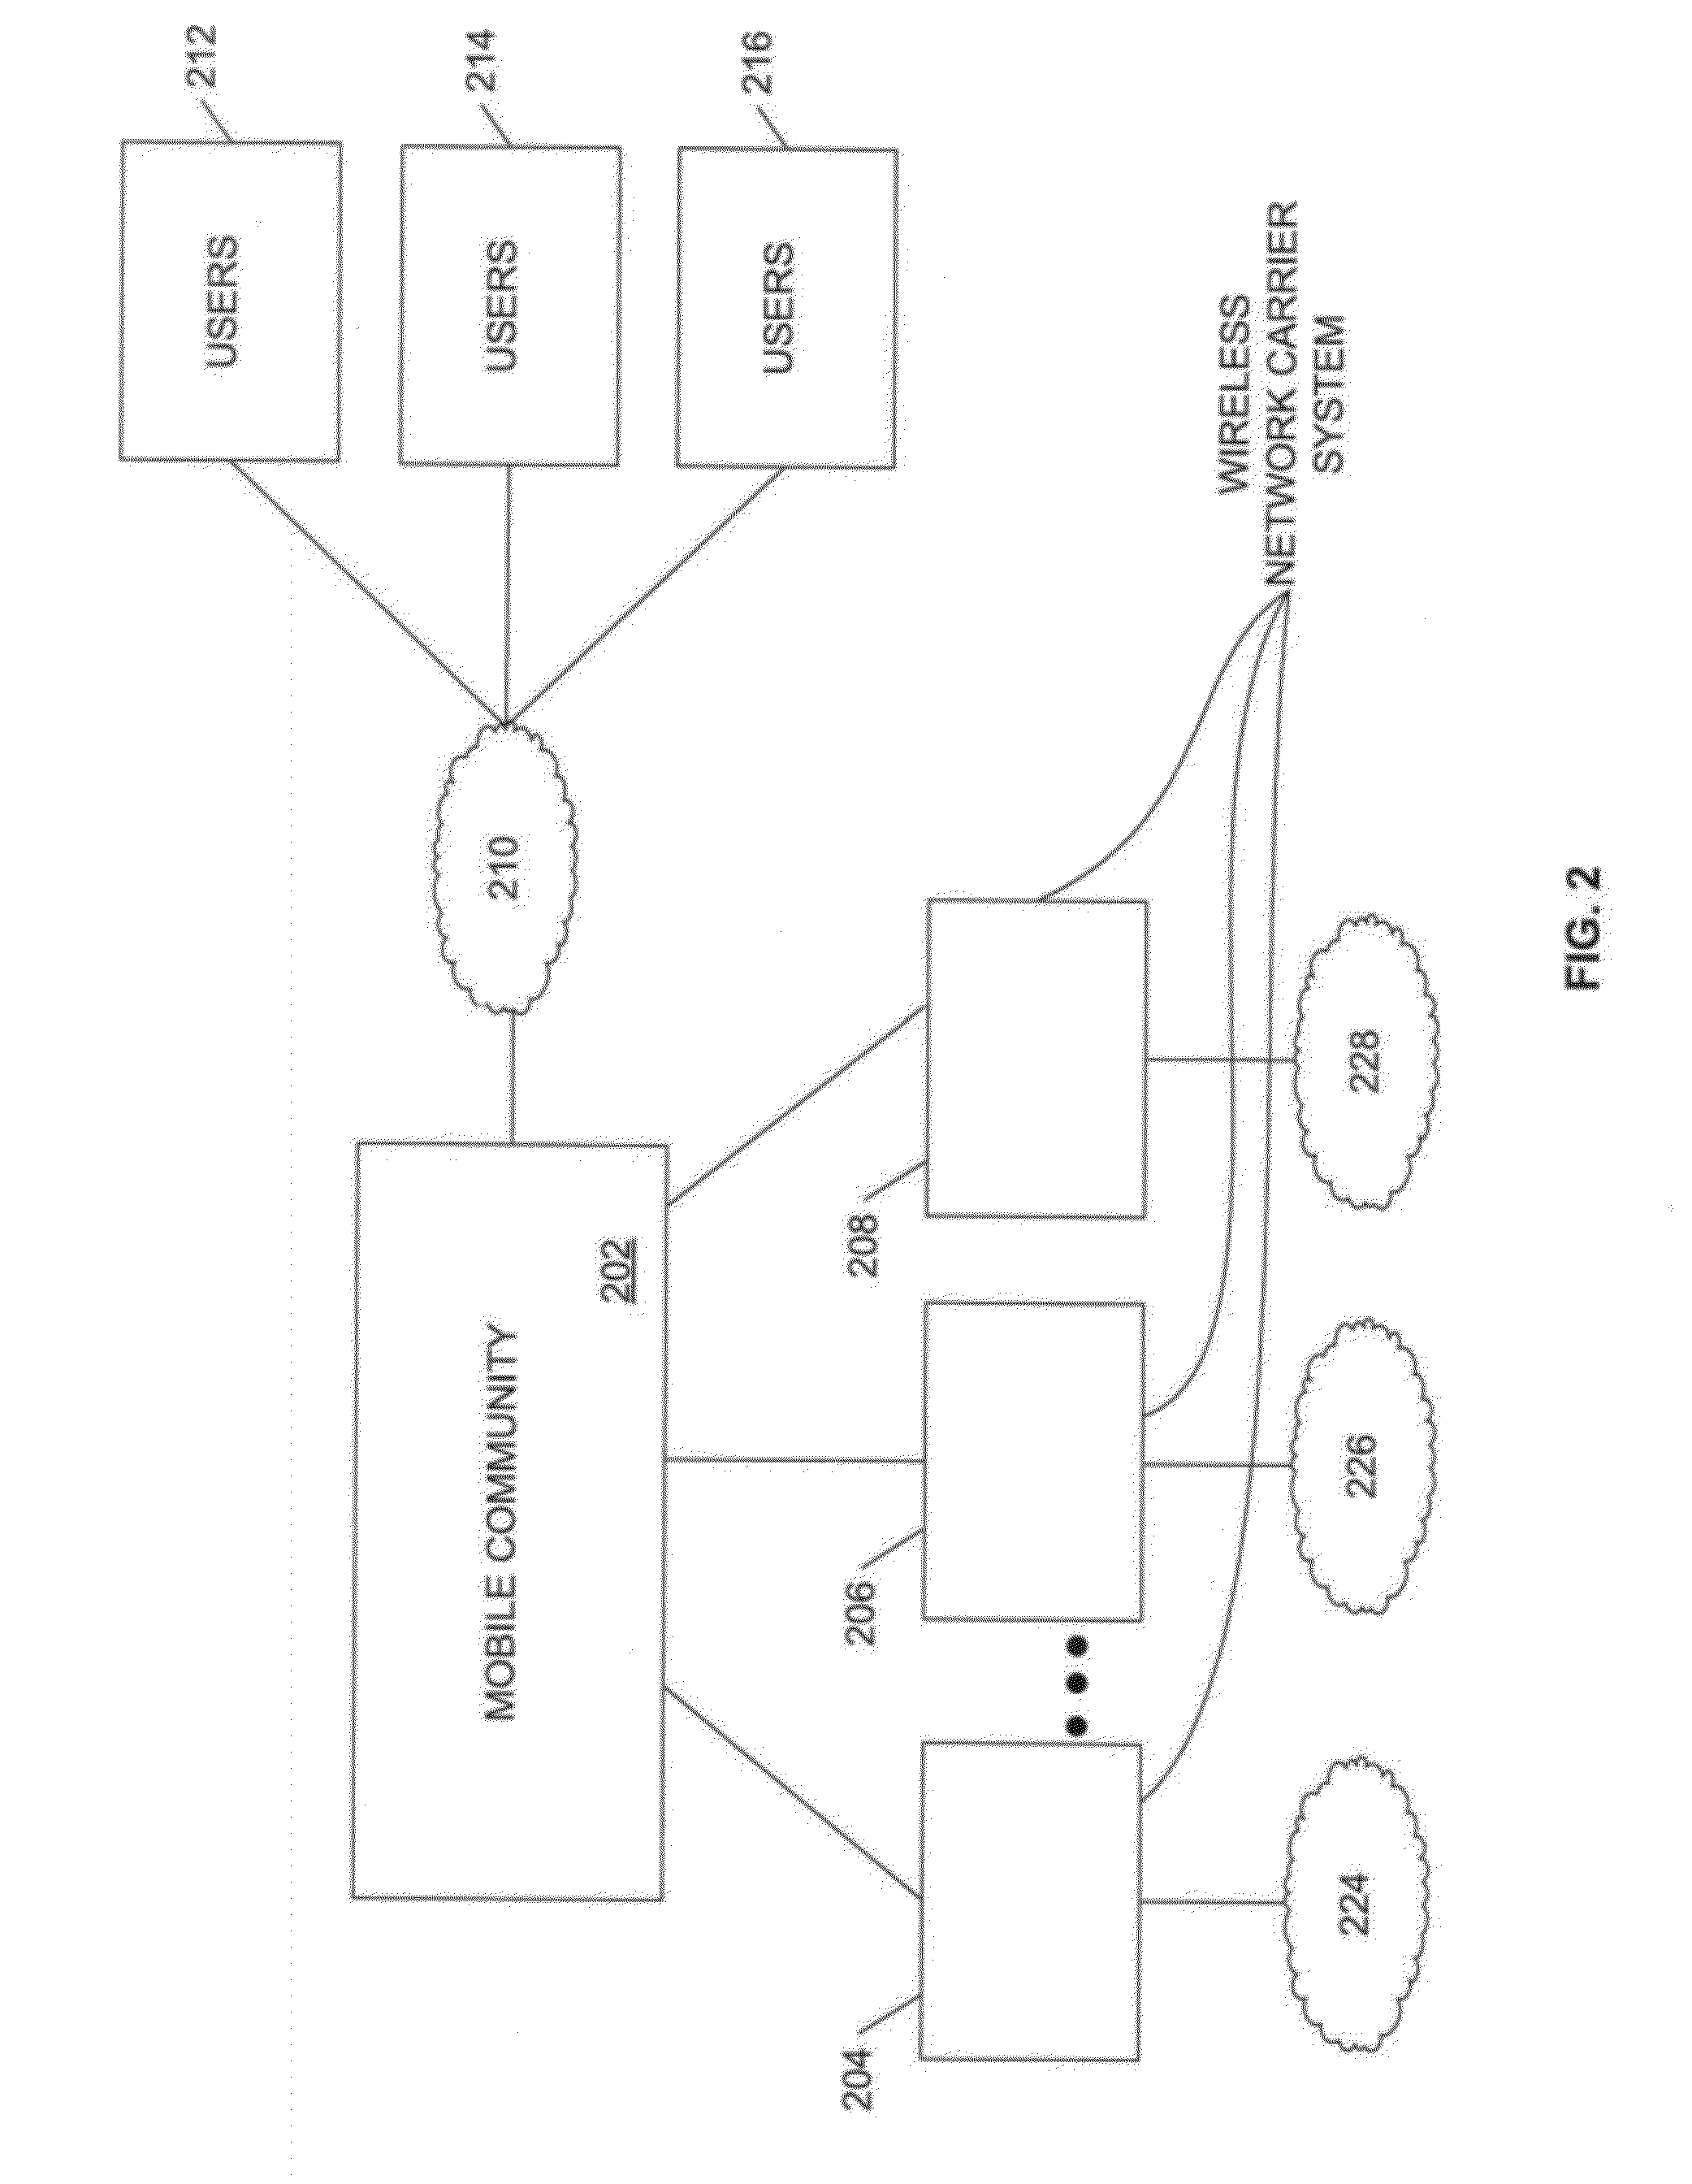 Methods and systems for finding, tagging, rating and suggesting content provided by networked application pods